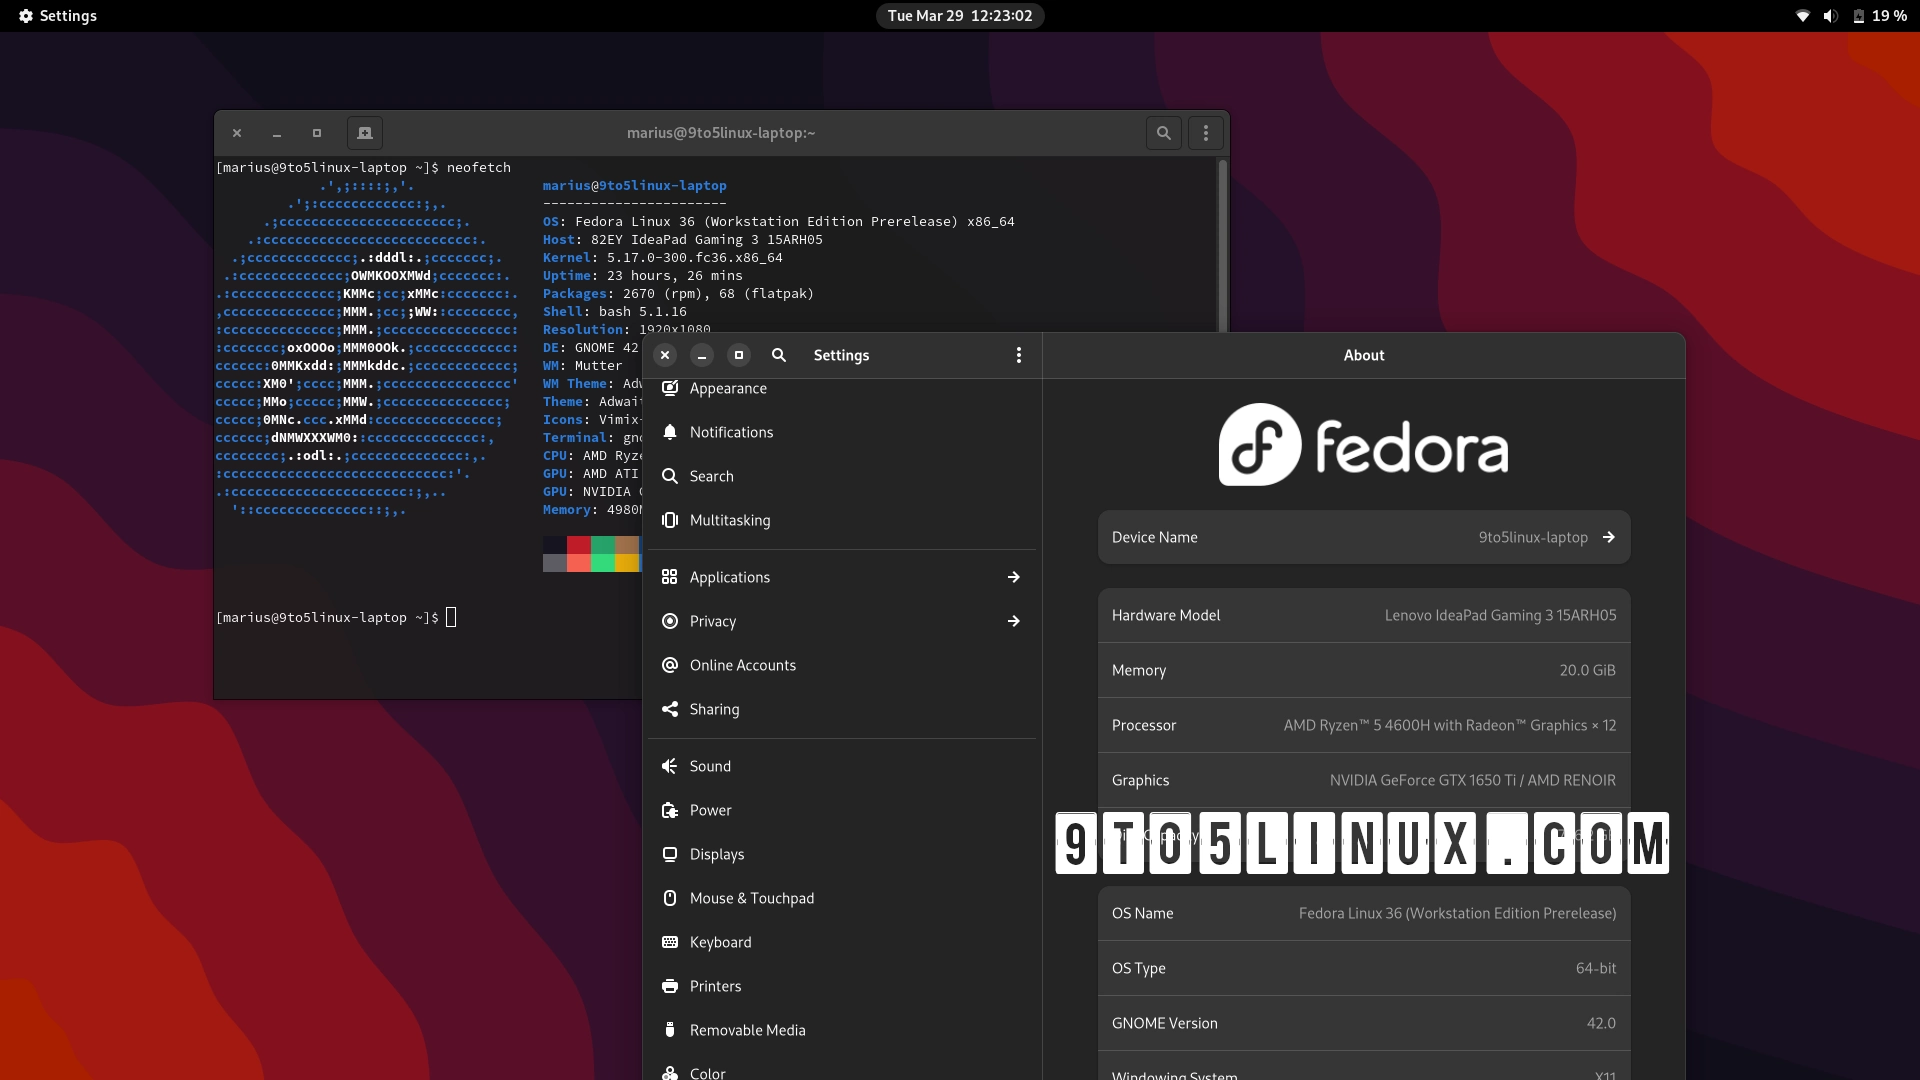 Fedora Linux 36 Beta Is Out with the GNOME 42 Desktop Environment and Linux Kernel 5.17